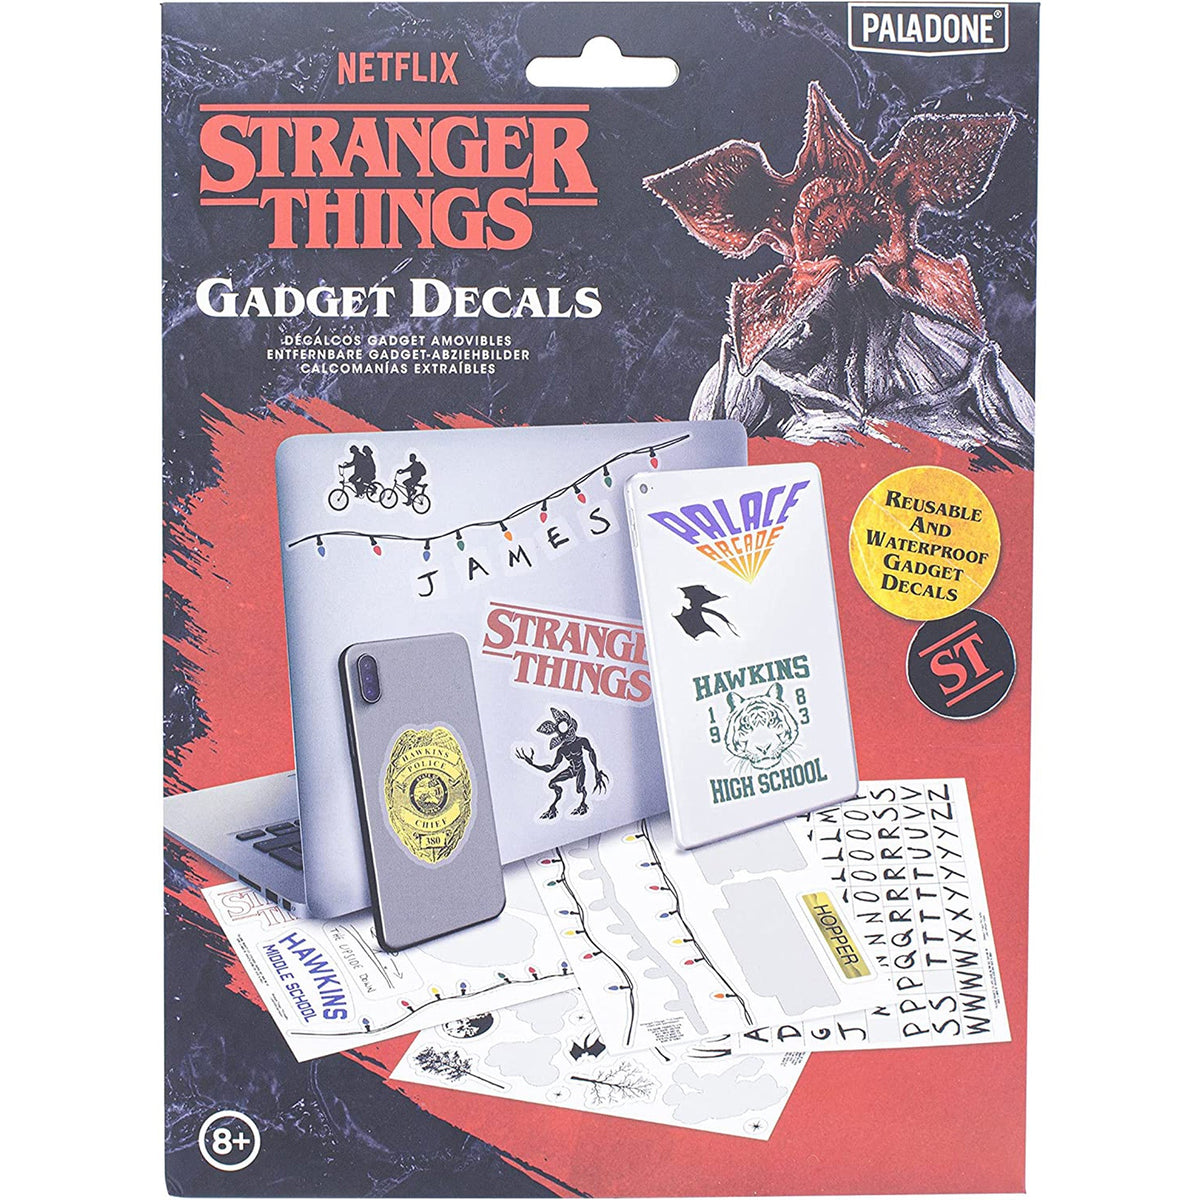 PALADONE PRODUCTS INC. Novelties Stranger Things Gadget Decals 5055964790639